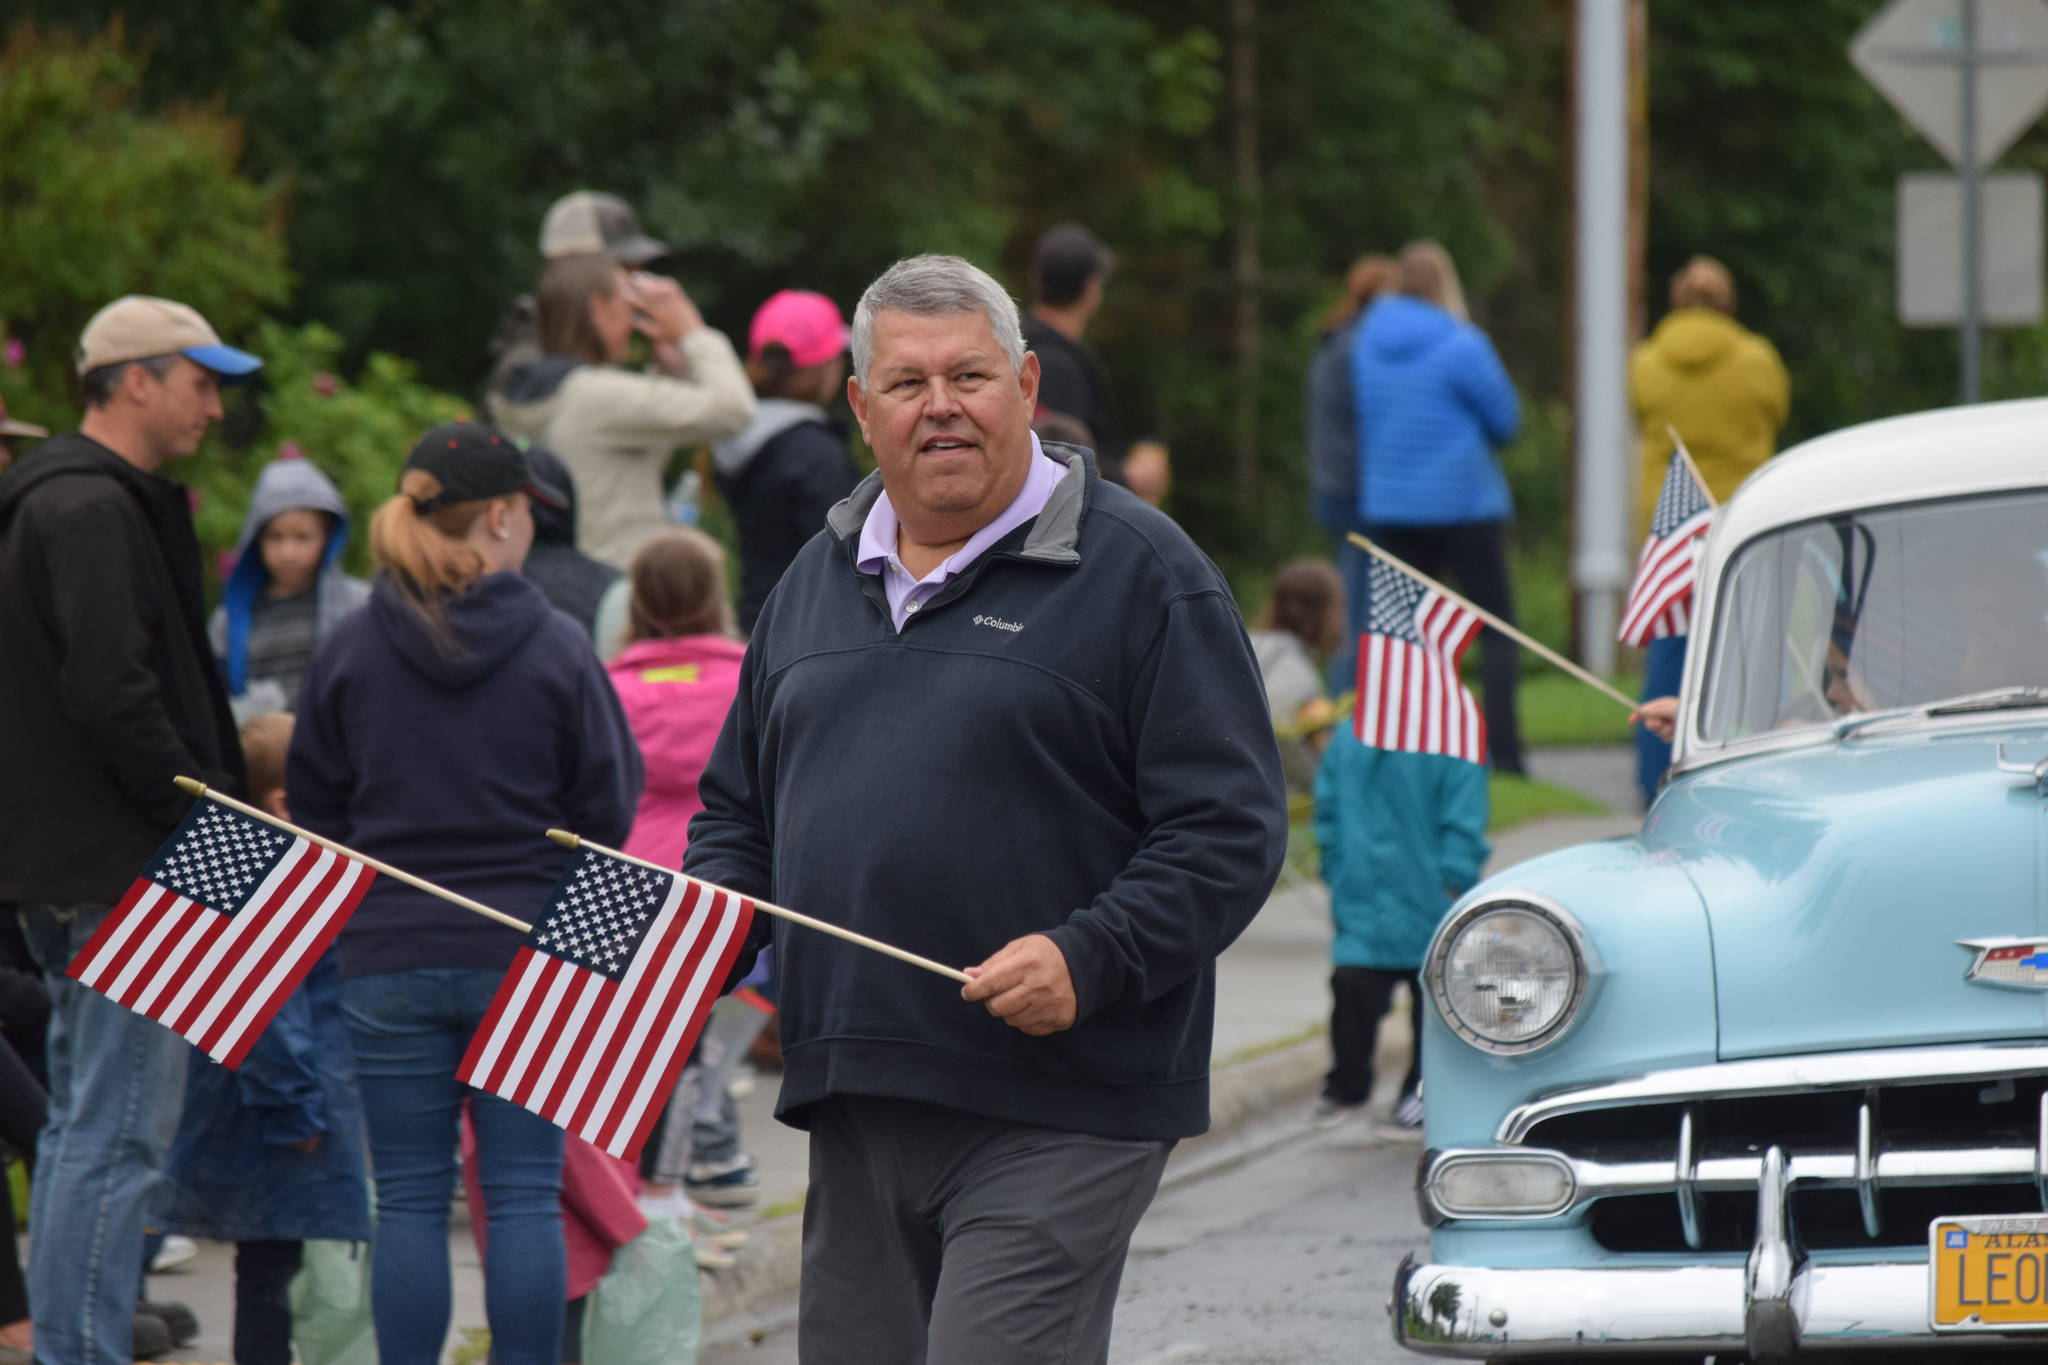 Borough Mayor Charlie Pierce waves to the crowd during the Soldotna Progress Days parade on Saturday, July 24, 2021. (Camille Botello / Peninsula Clarion)